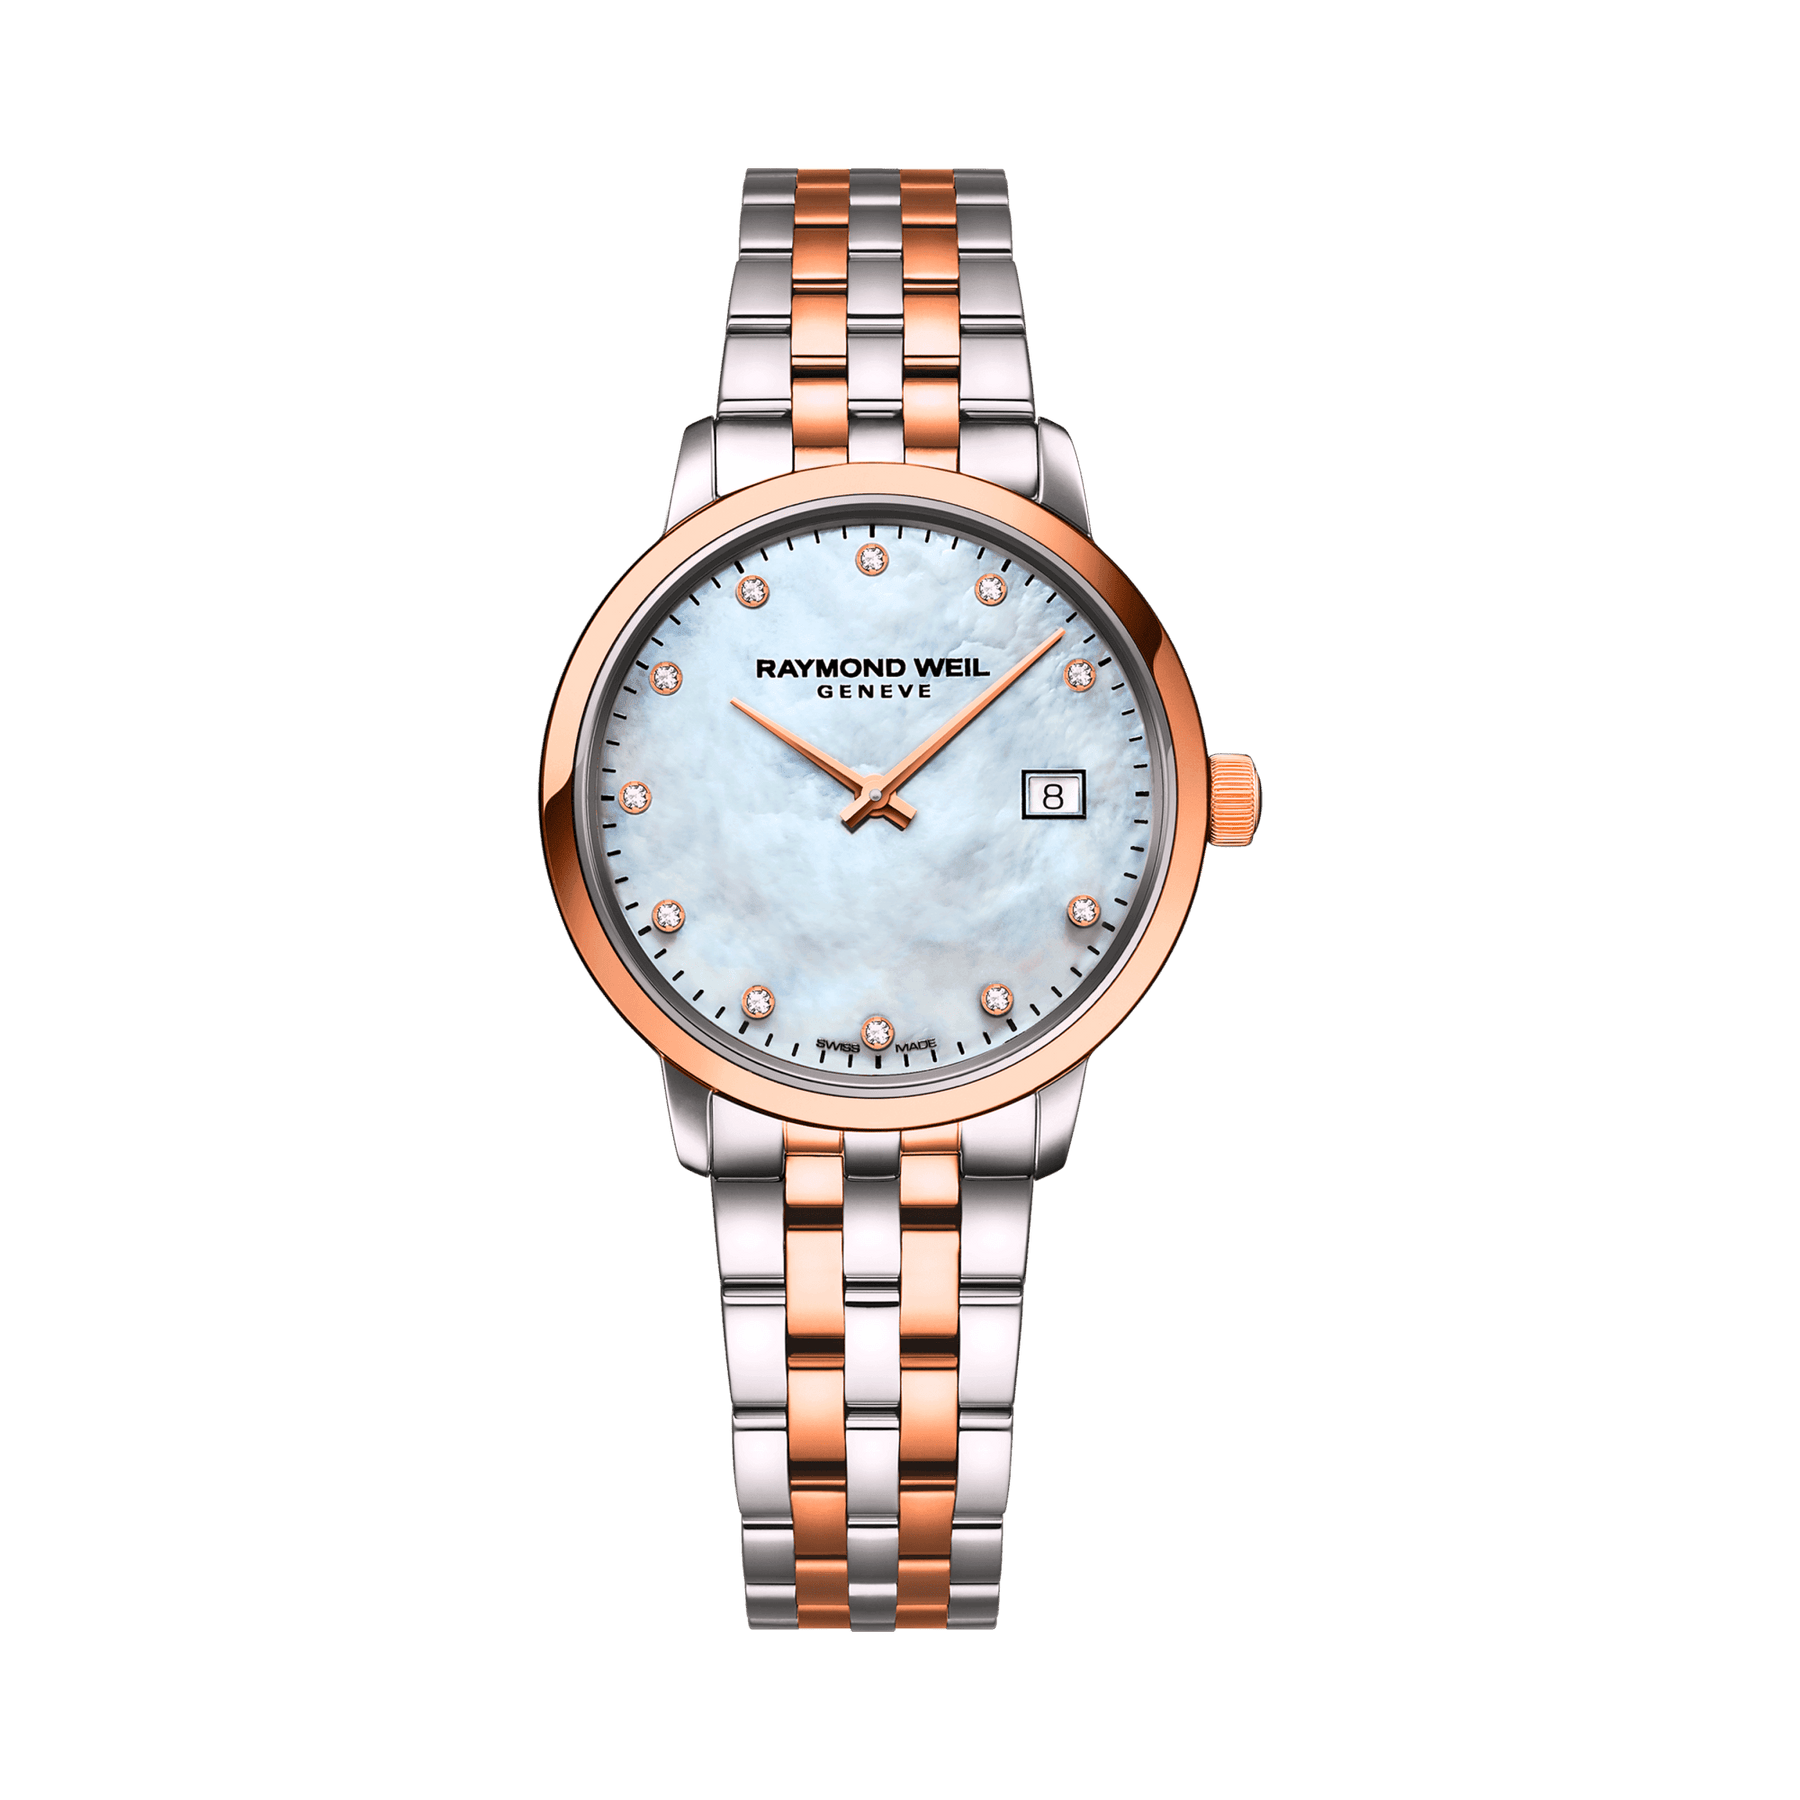 Raymond Weil Women's Toccata Quartz Dress Watch Mother-Of-Pearl Diamond Dial 5985-SP5-97081 - Wallace Bishop